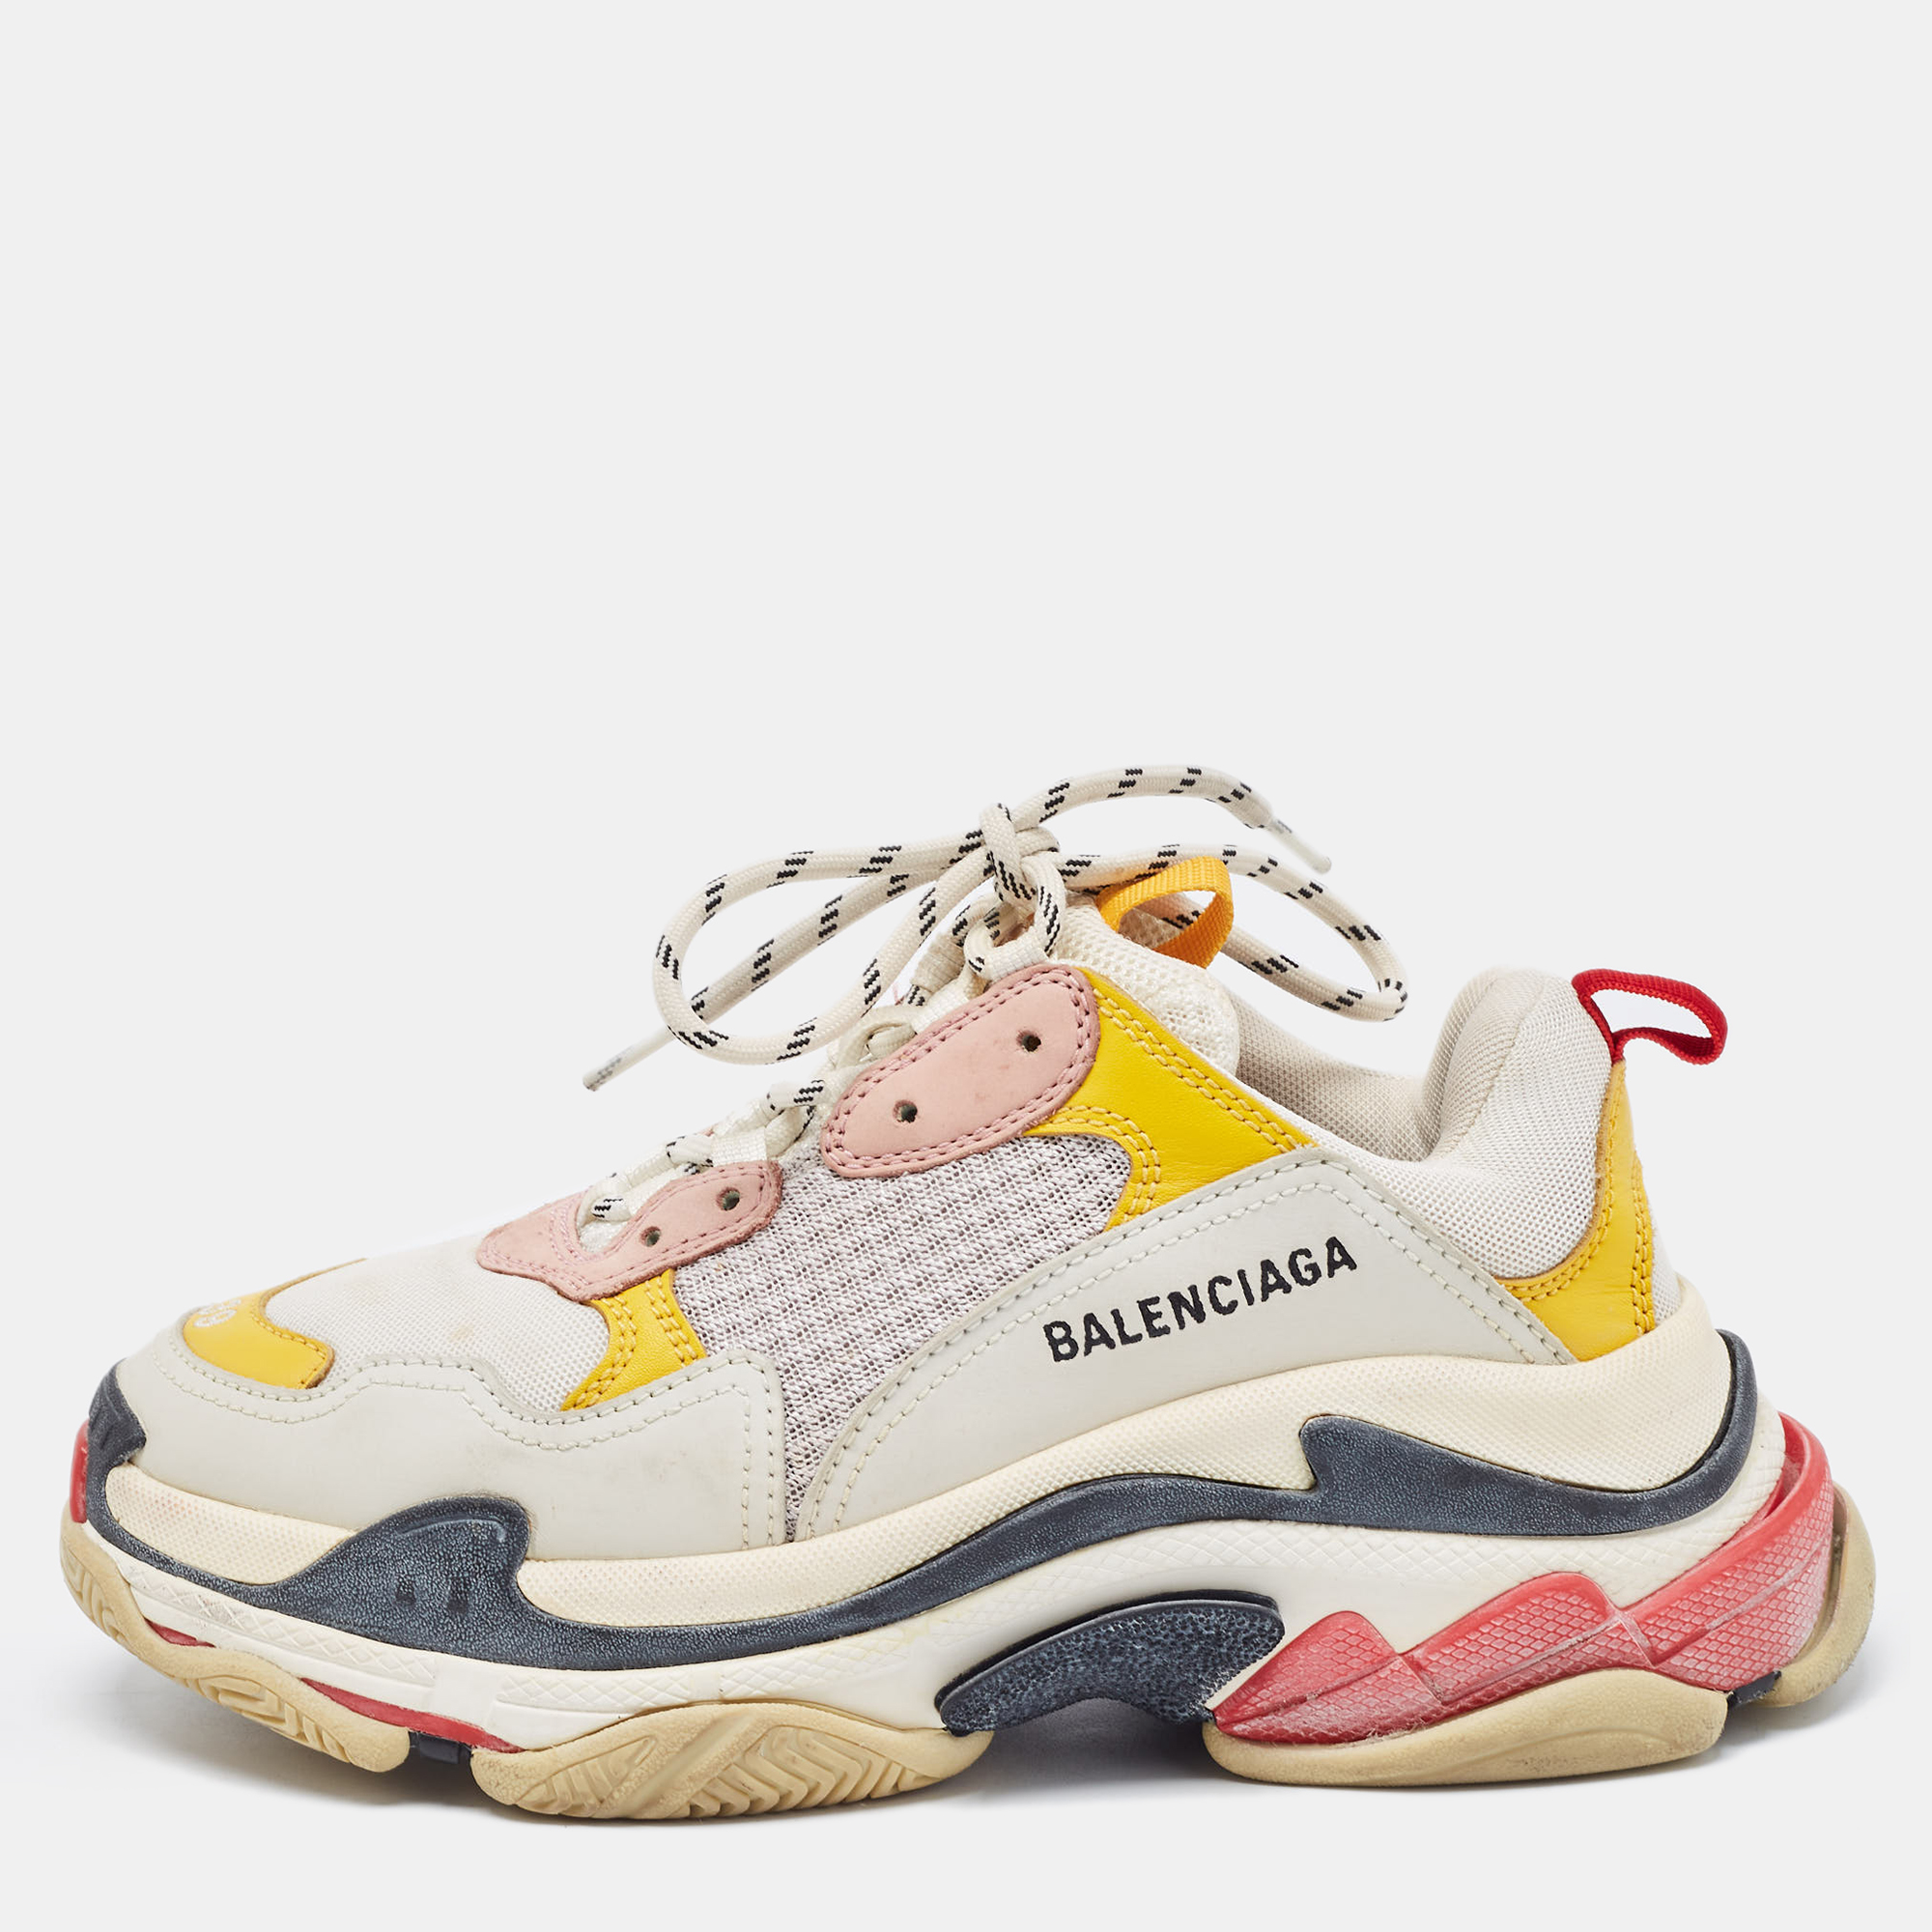 Pre-owned Balenciaga Multicolor Mesh And Leather Triple S Sneakers Size 39